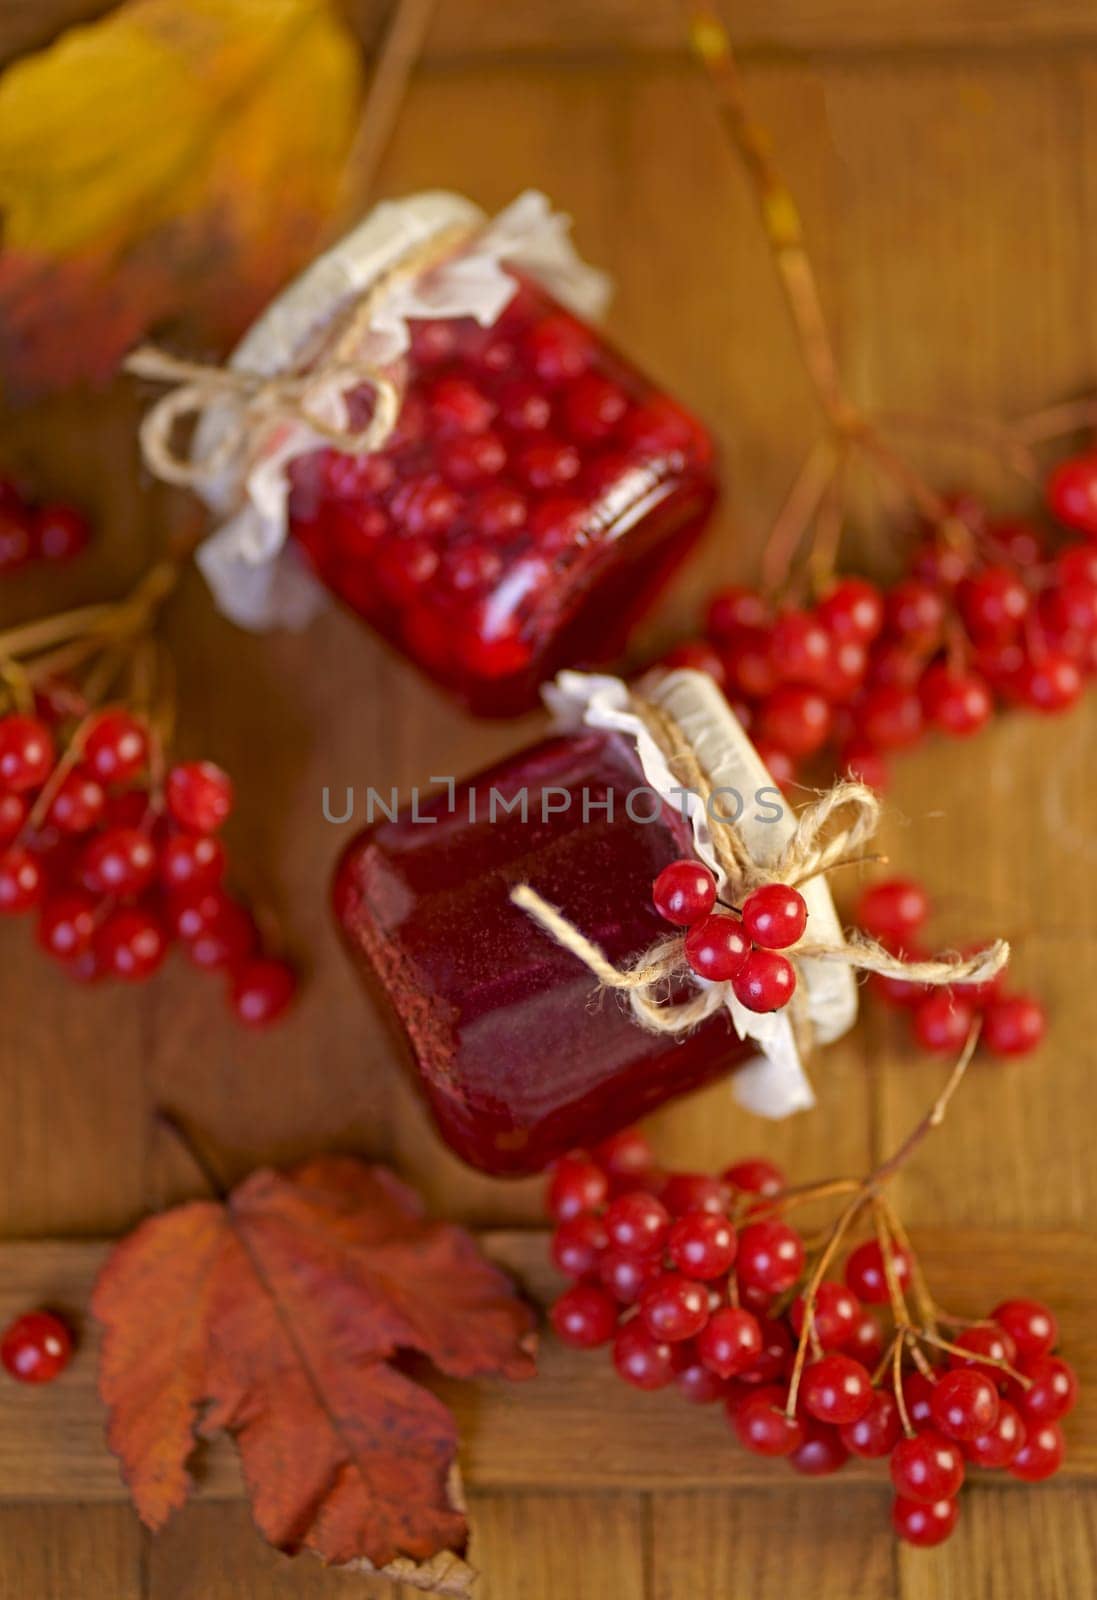 Home preparations. Viburnum jam in a glass jar on a wooden table near fresh viburnum berries and autumn berries by aprilphoto